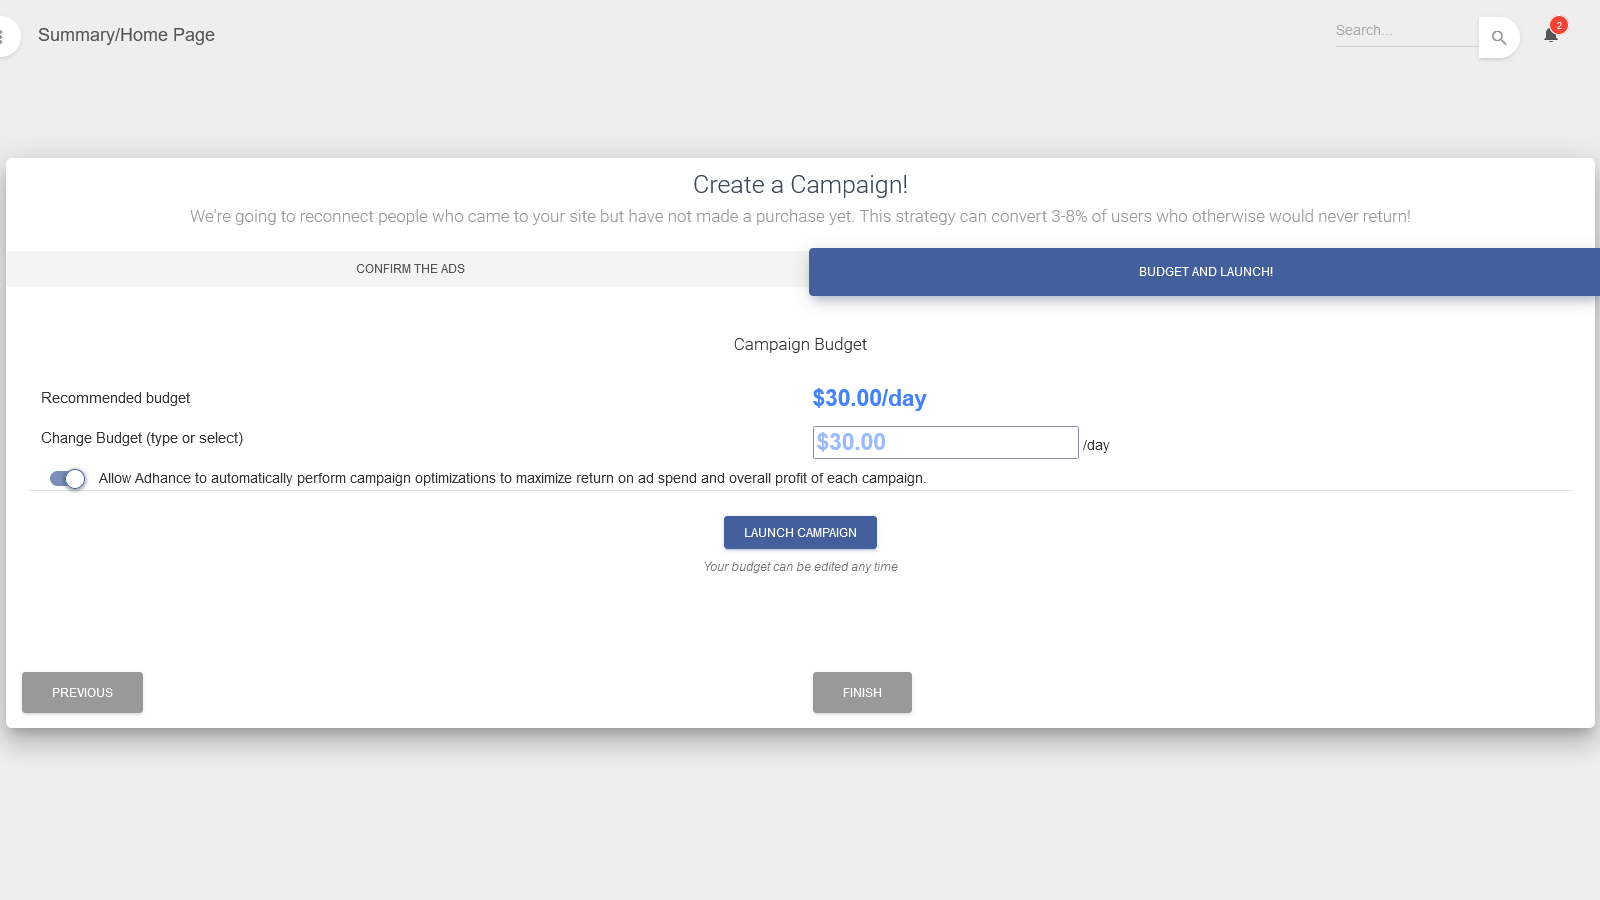 Launch campaigns in seconds